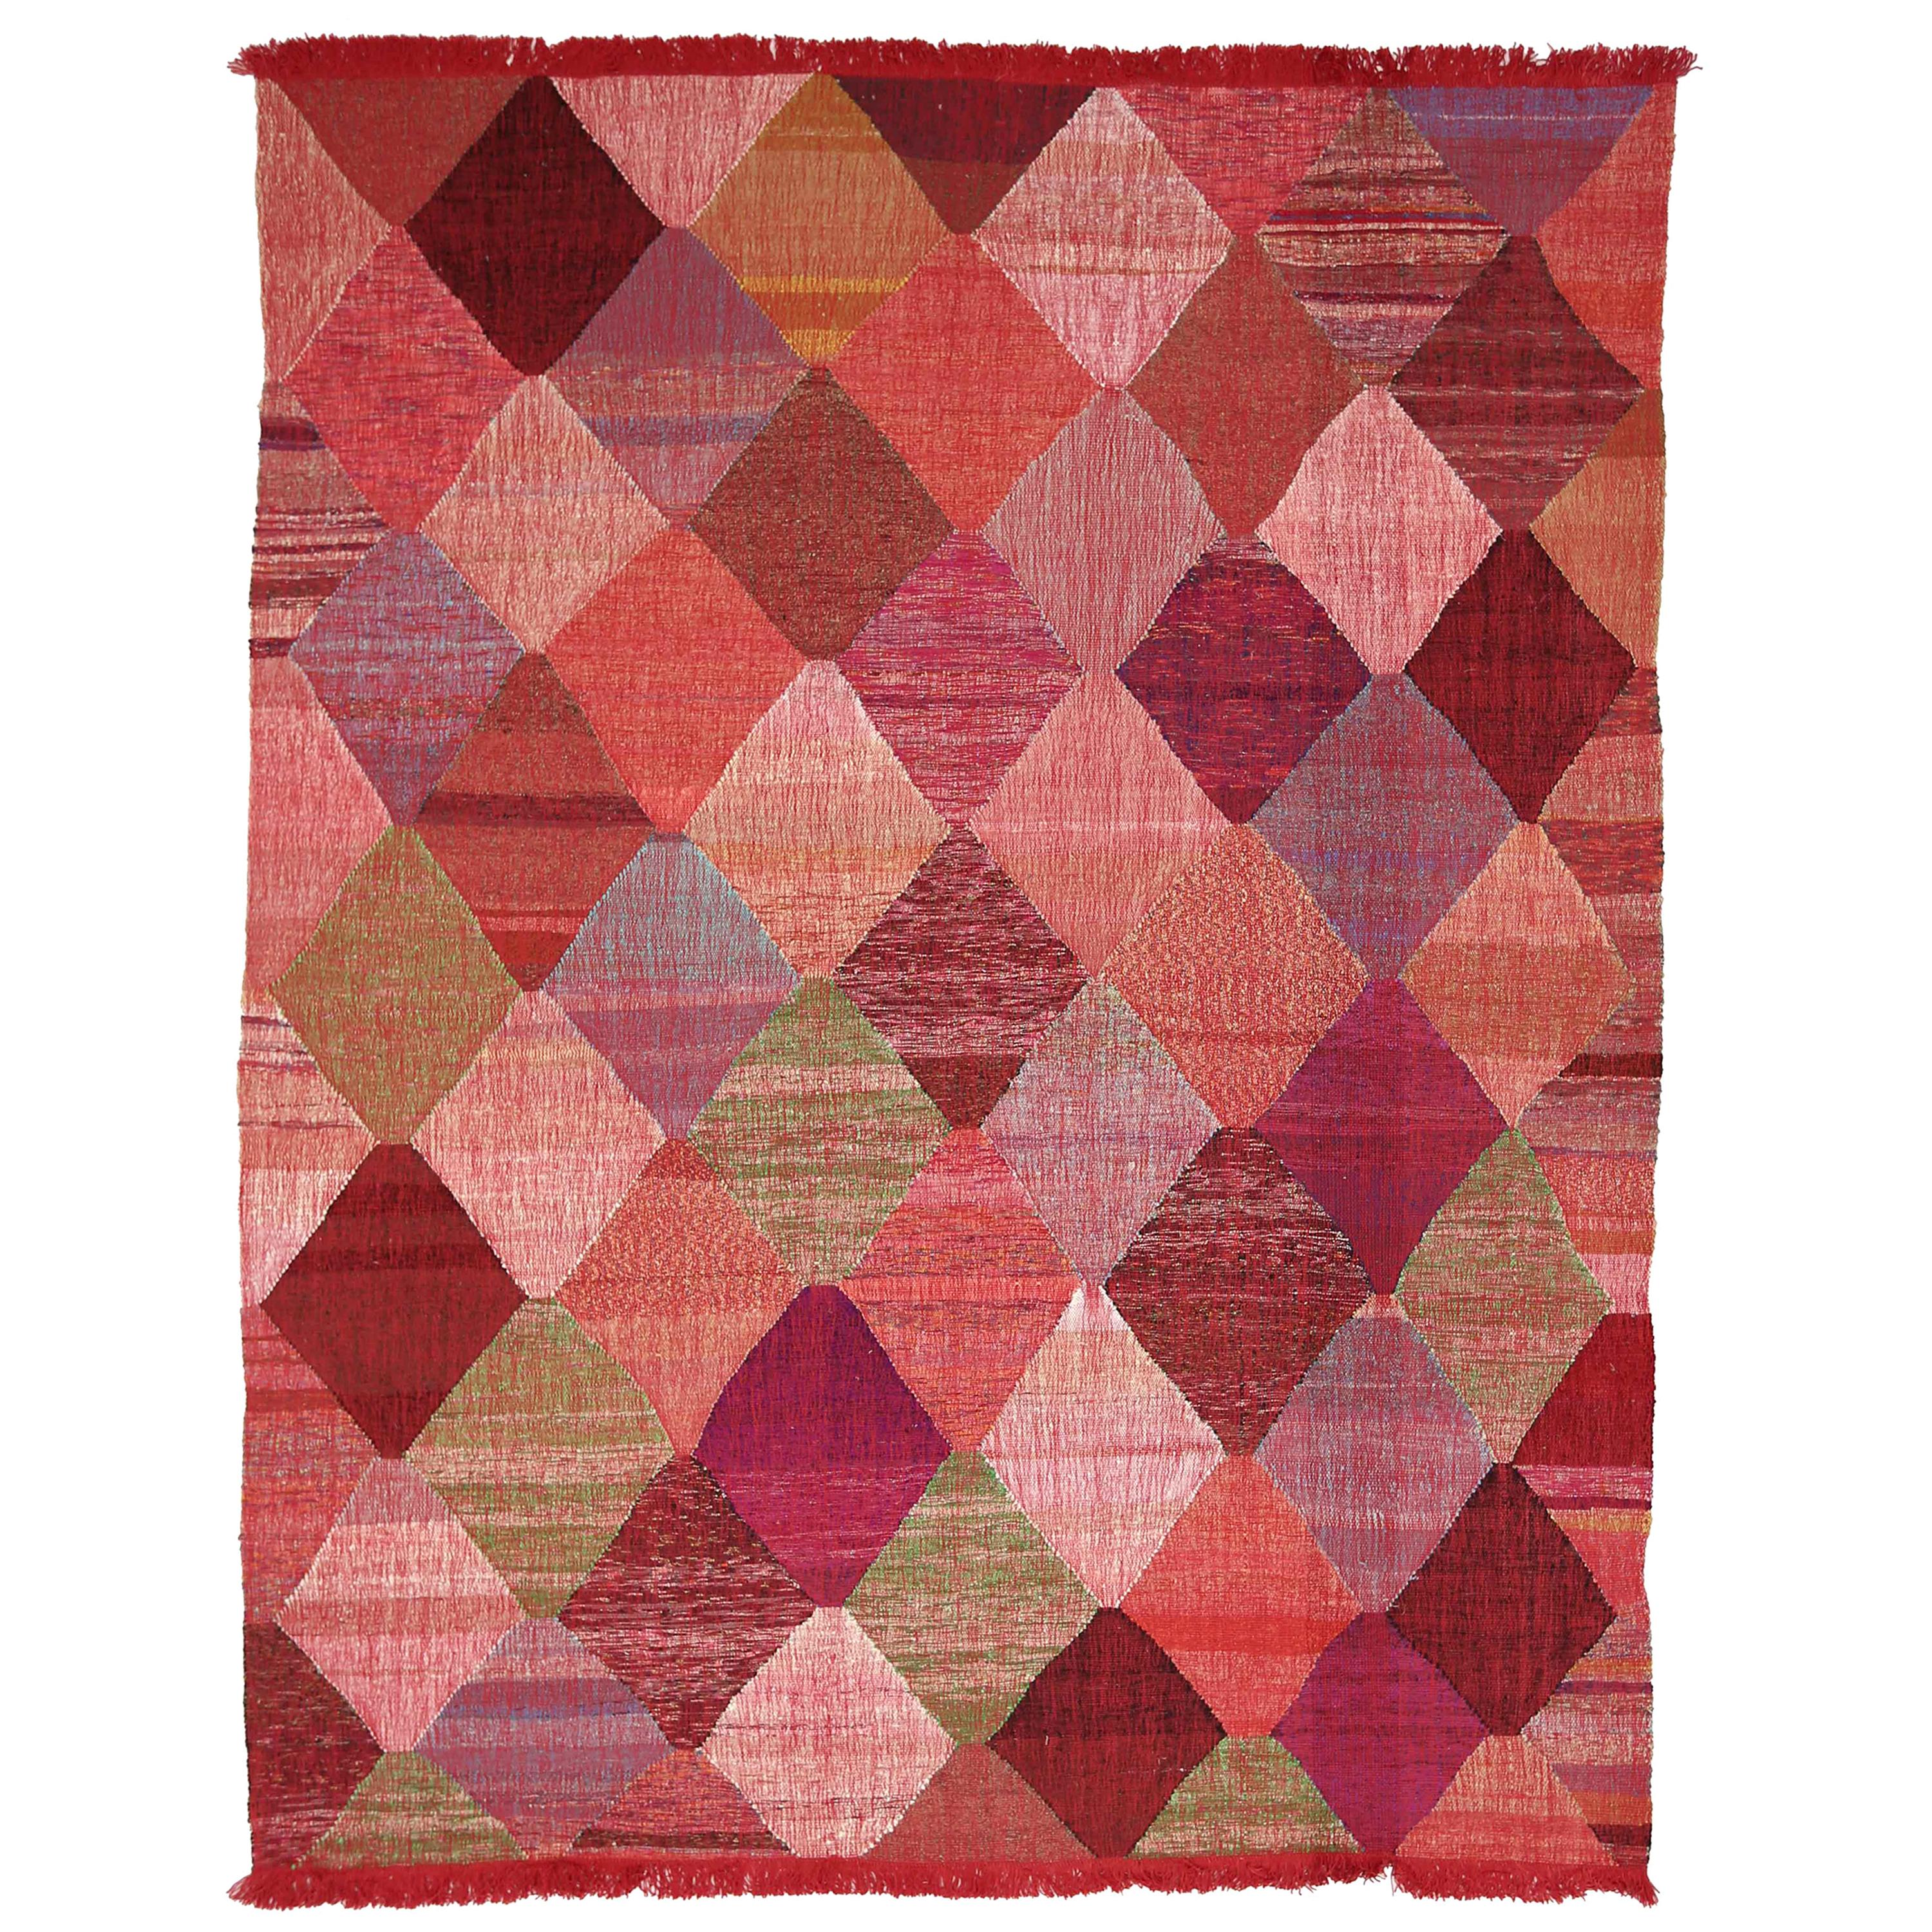 Modern Turkish Kilim Rug Made of Antique Wool with Colored Diamond Details